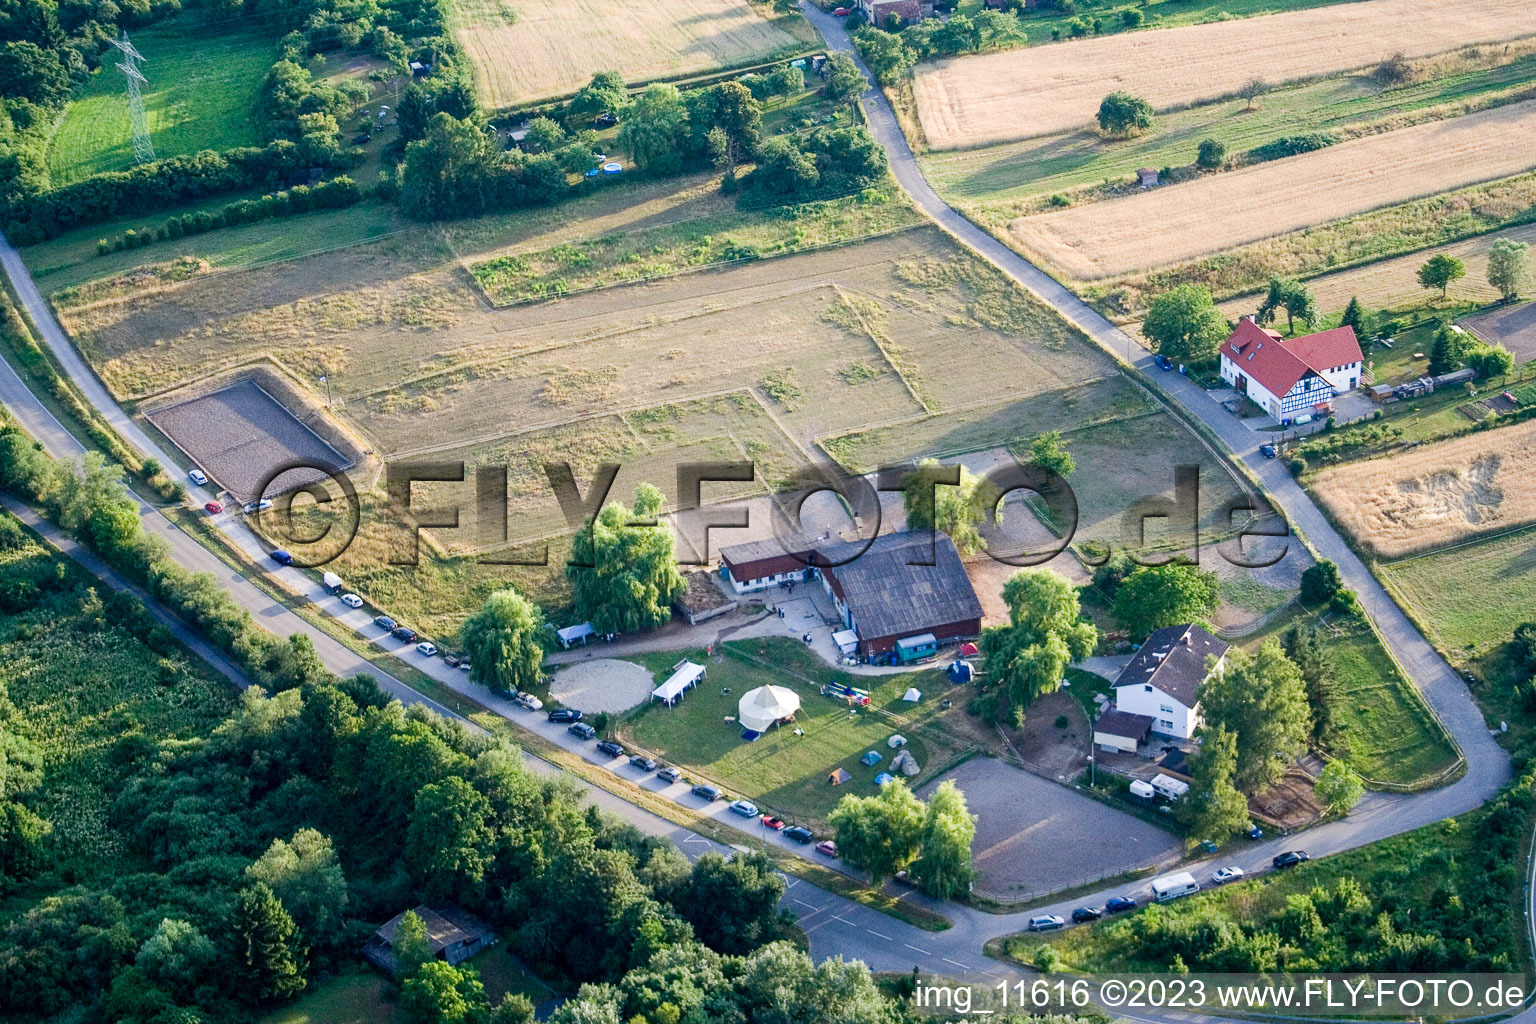 Reithof Trab eV therapeutic riding on Lake Constance in the district Wollmatingen in Konstanz in the state Baden-Wuerttemberg, Germany from the drone perspective